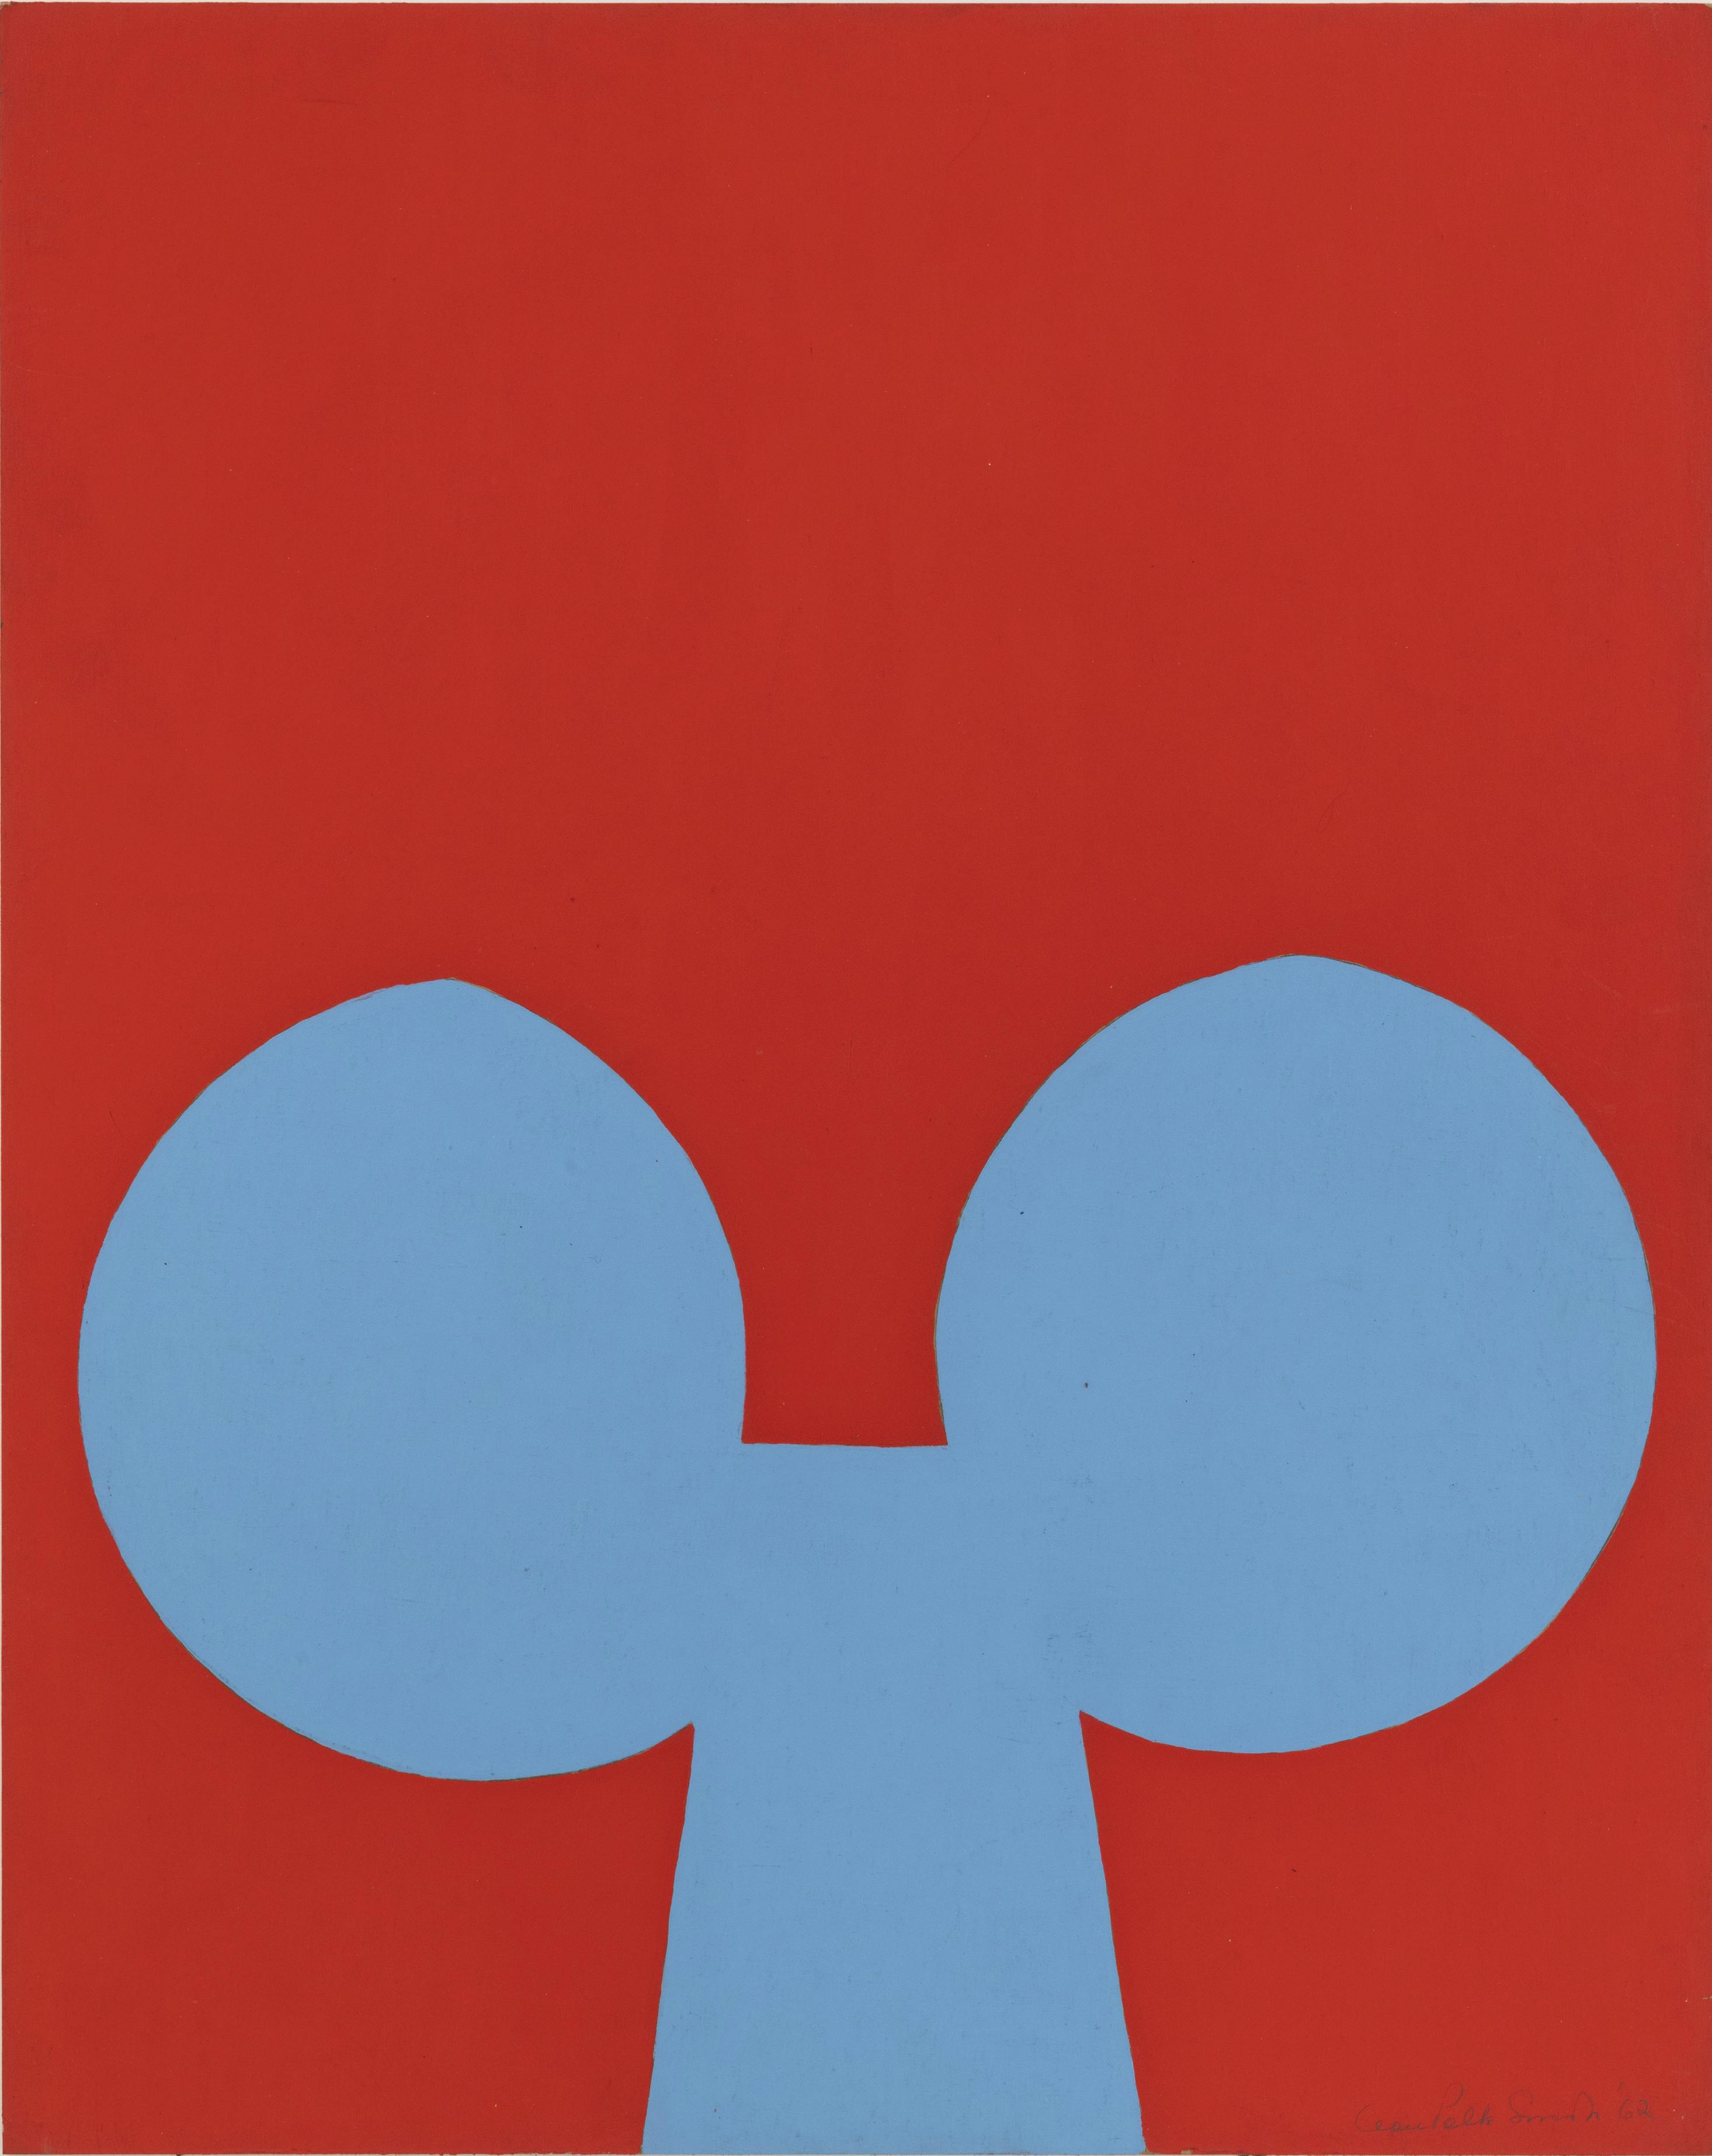 A painting by Leon Polk Smith. The work is a vibrant red, painted flatly all over. In the lower half of the image sits a large, light blue shape: two circles connected by a rectangular form.